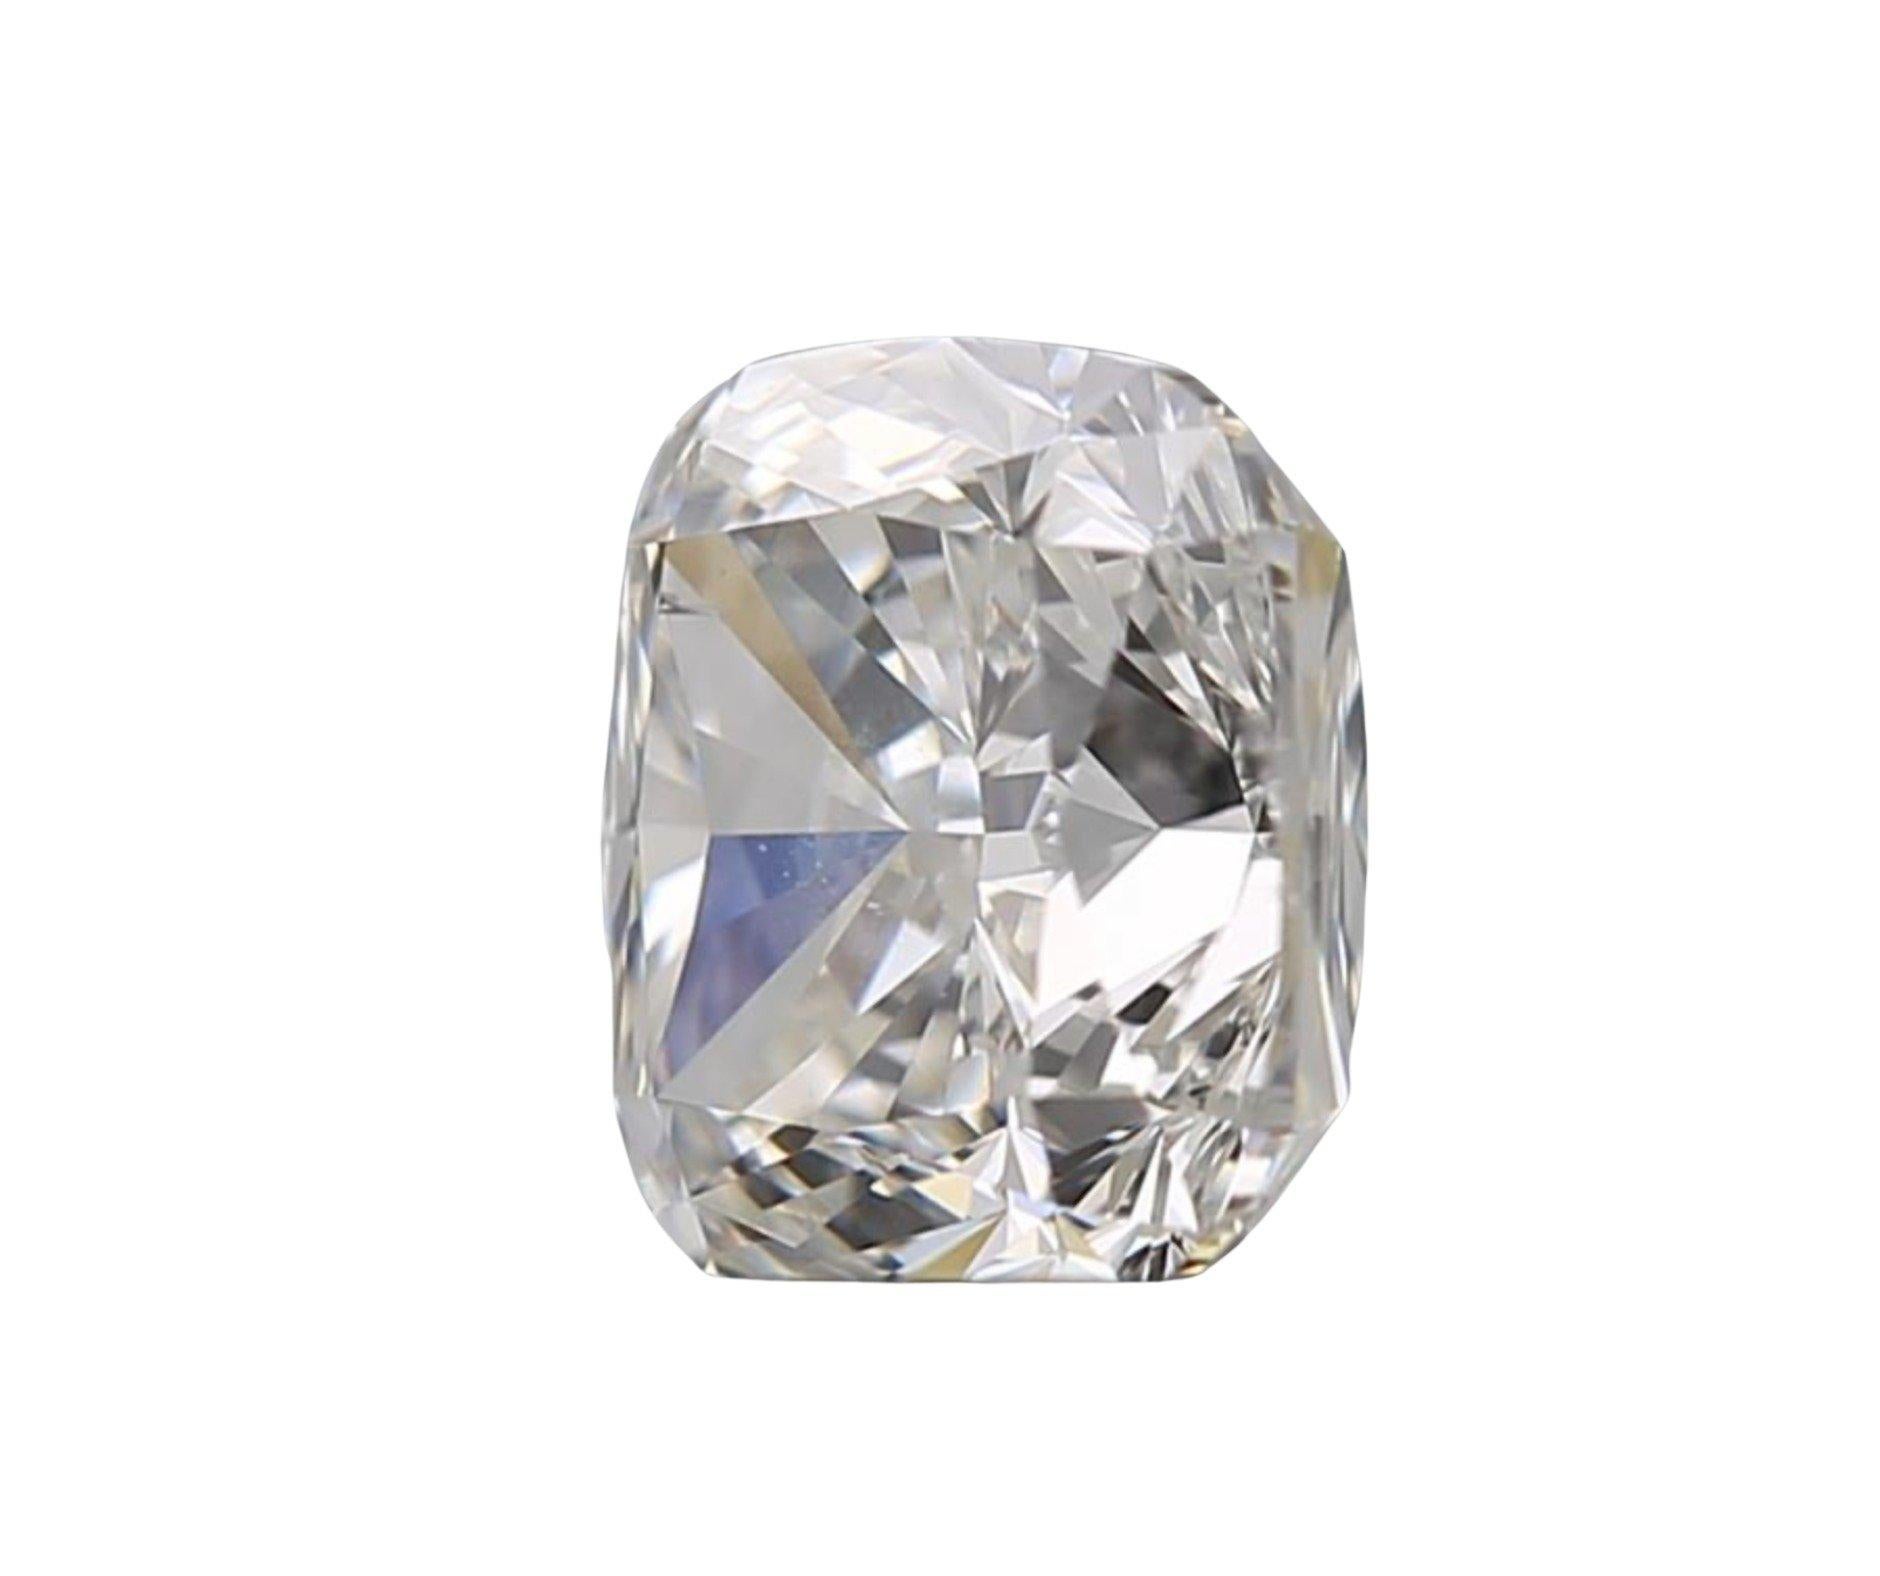 Natural cushion modified brilliant diamond in a 0.94 carat I SI1 with Beautiful cut and shine. This diamond comes with an GIA Certificate and laser inscription number.

GIA 7446409269

sku: H380-217A
